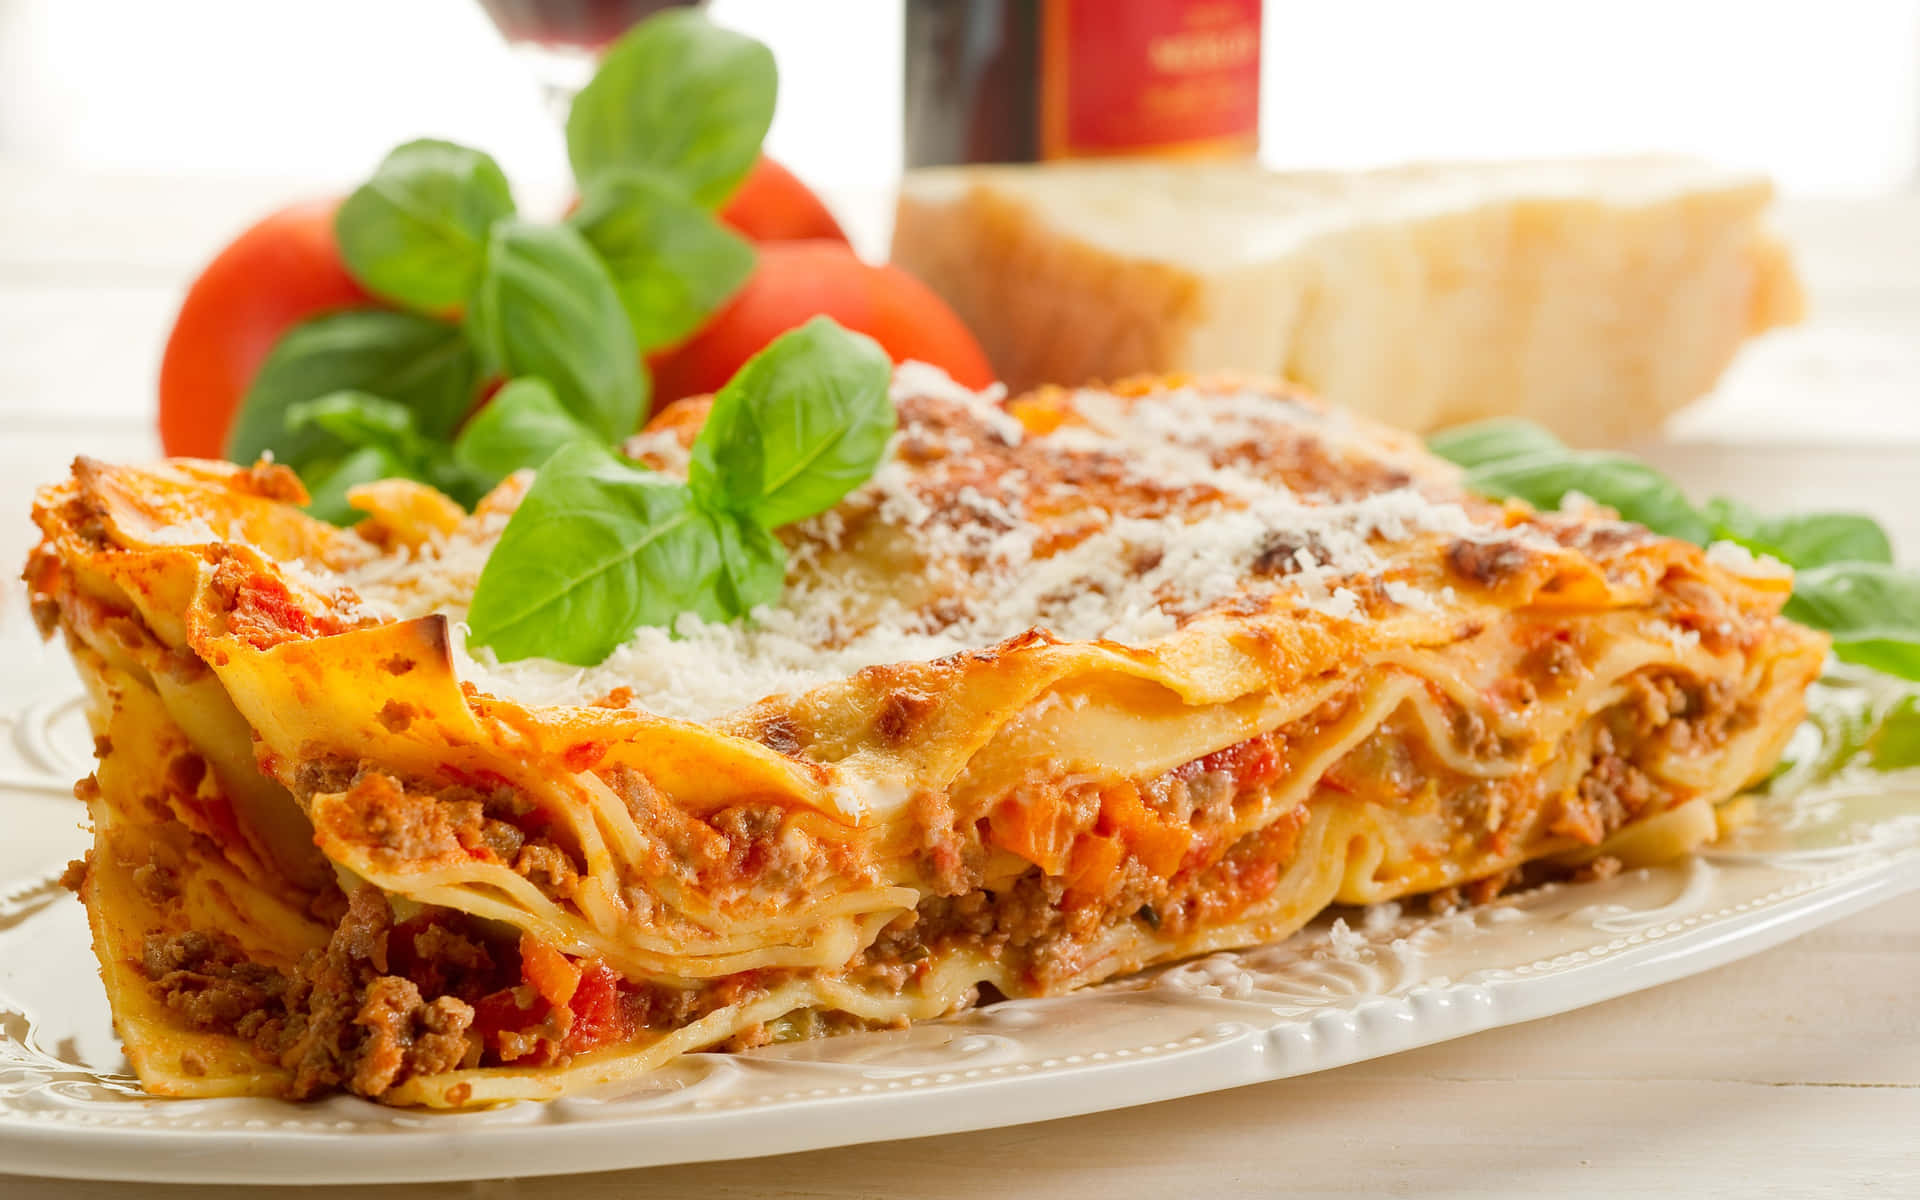 A Plate Of Lasagna With Meat And Vegetables On It